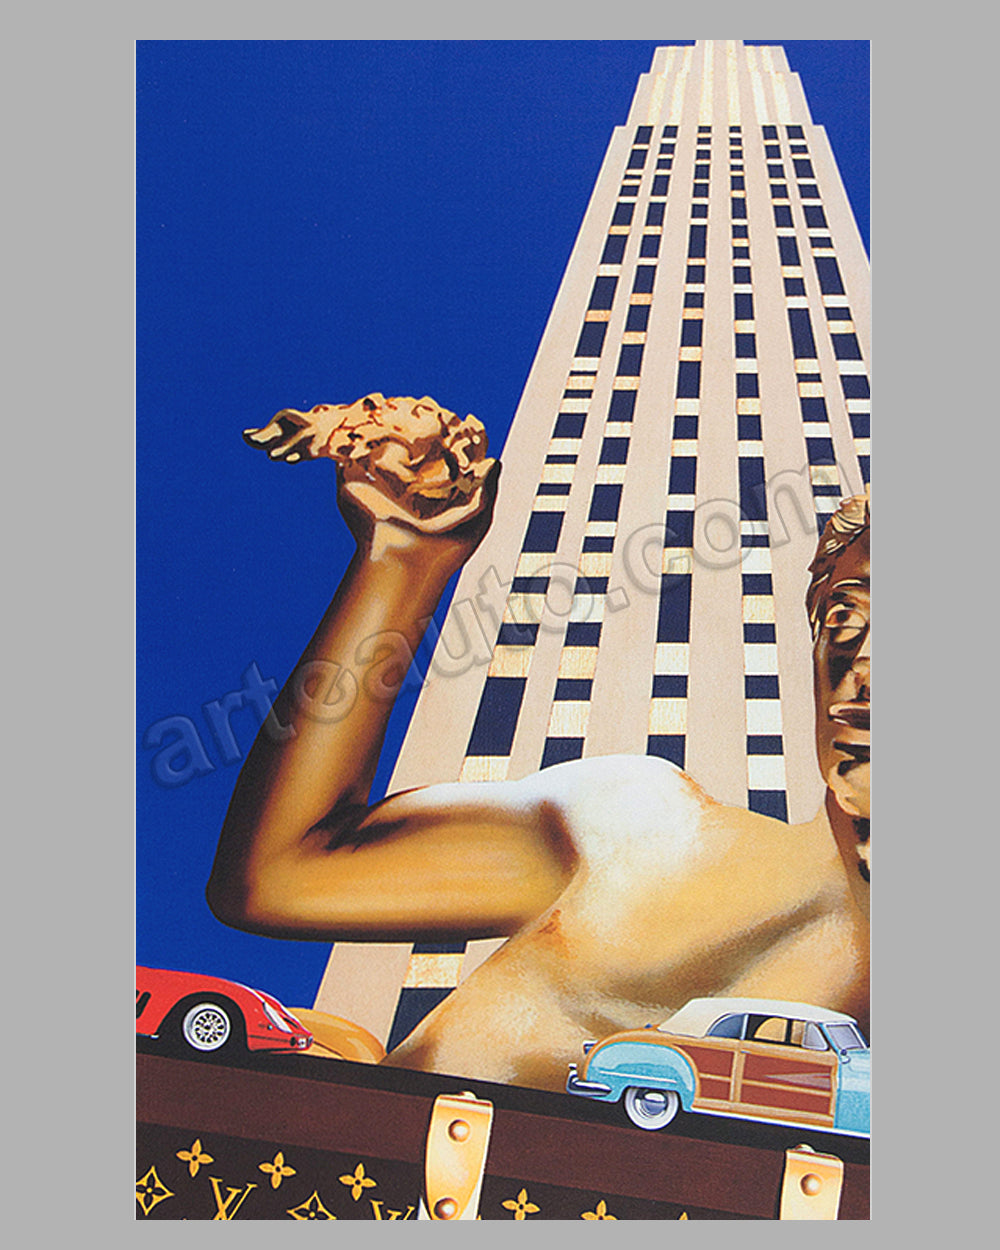 Louis Vuitton Classic at Rockefeller Center 1996 large poster by Razzia  Temporarily Out of Stock$625.00